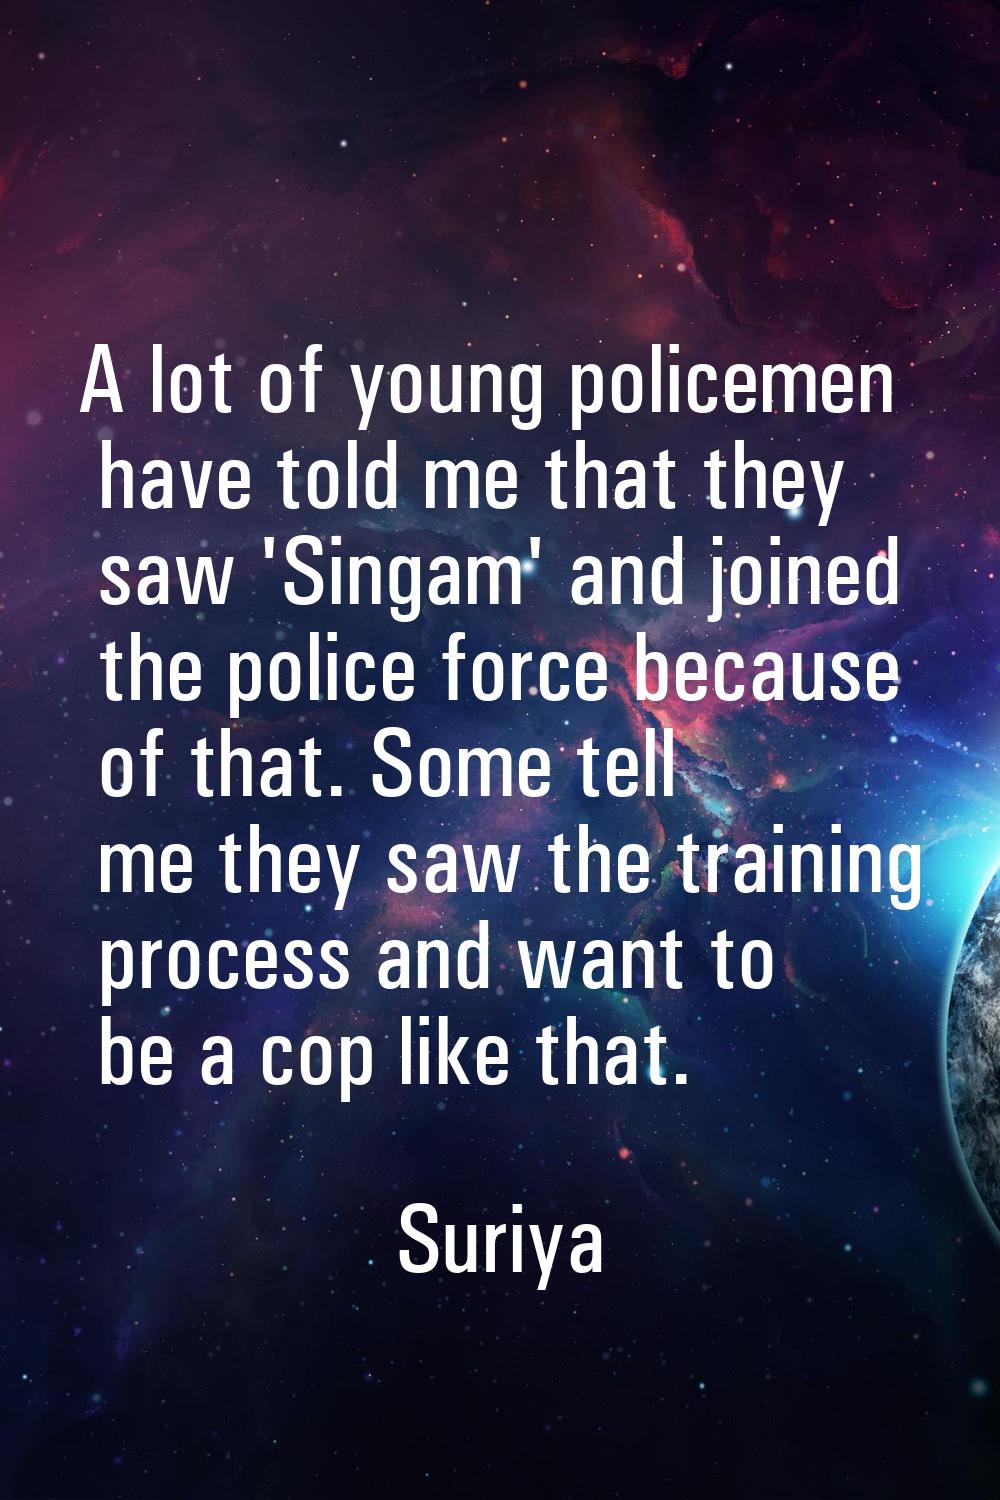 A lot of young policemen have told me that they saw 'Singam' and joined the police force because of